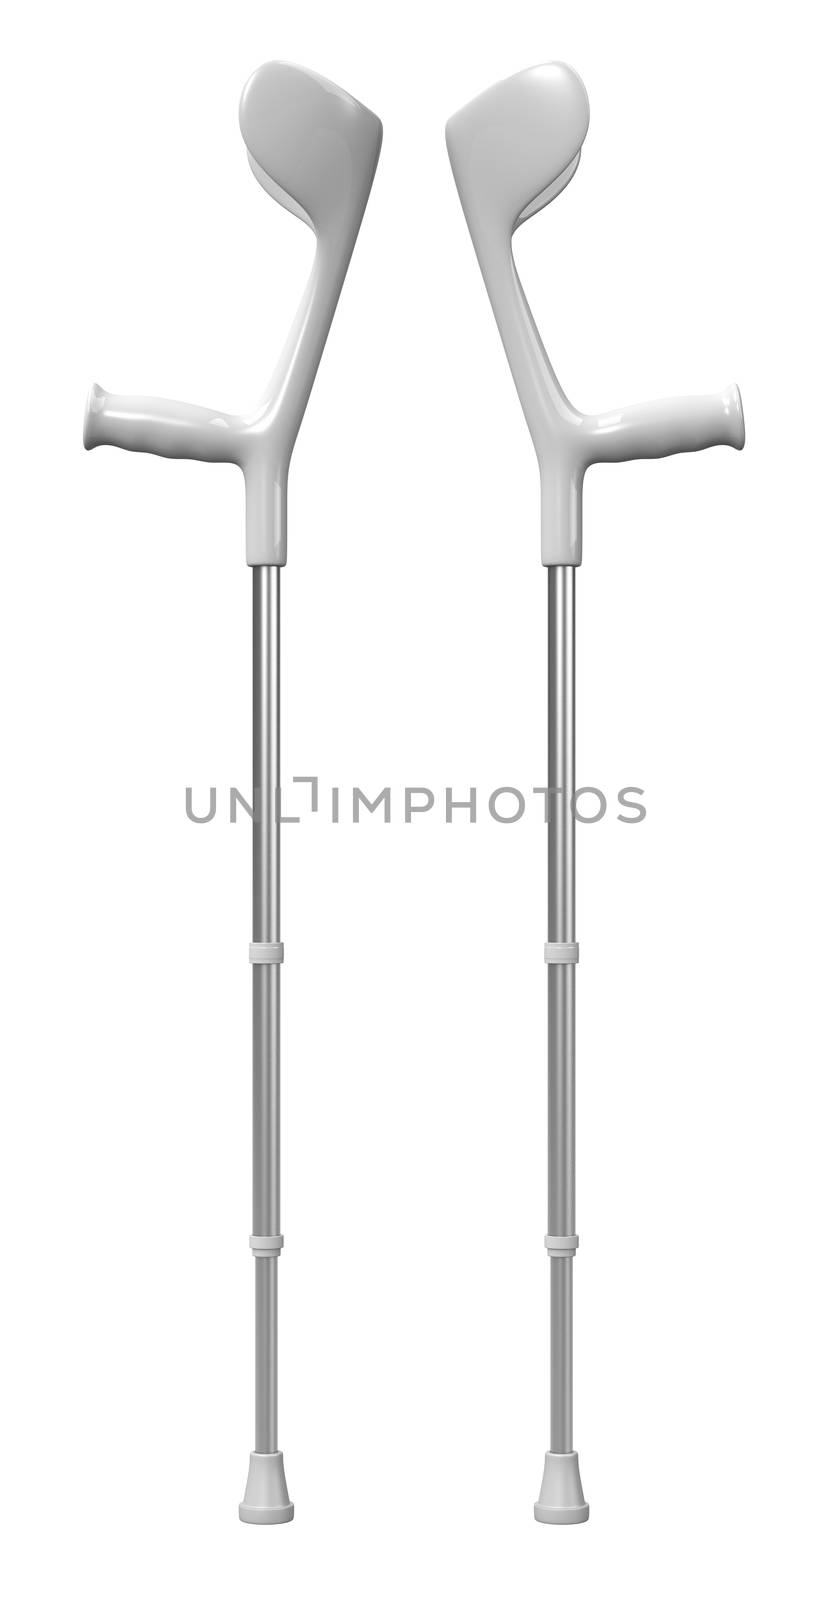 Crutches Isolated on White 3D Illustration